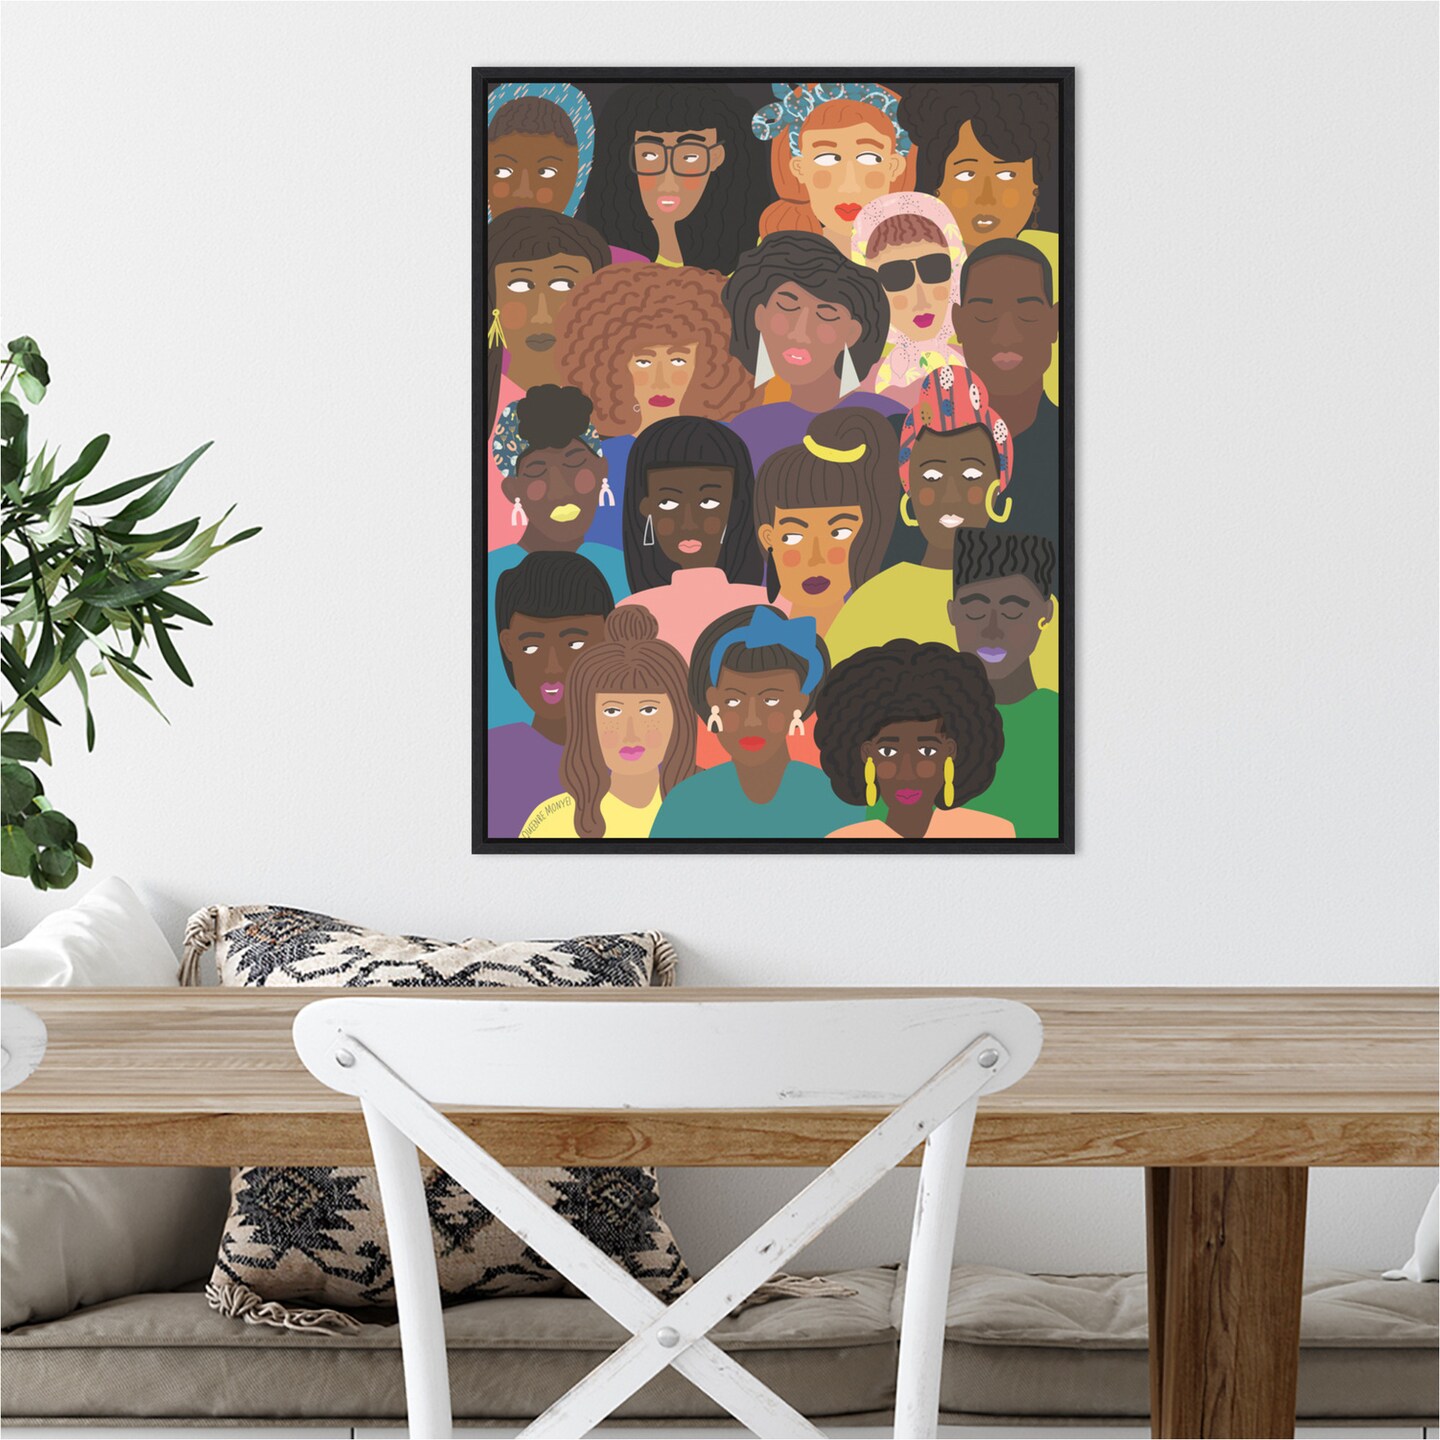 Black People United by Queenbe Monyei 18-in. W x 24-in. H. Canvas Wall Art Print Framed in Black